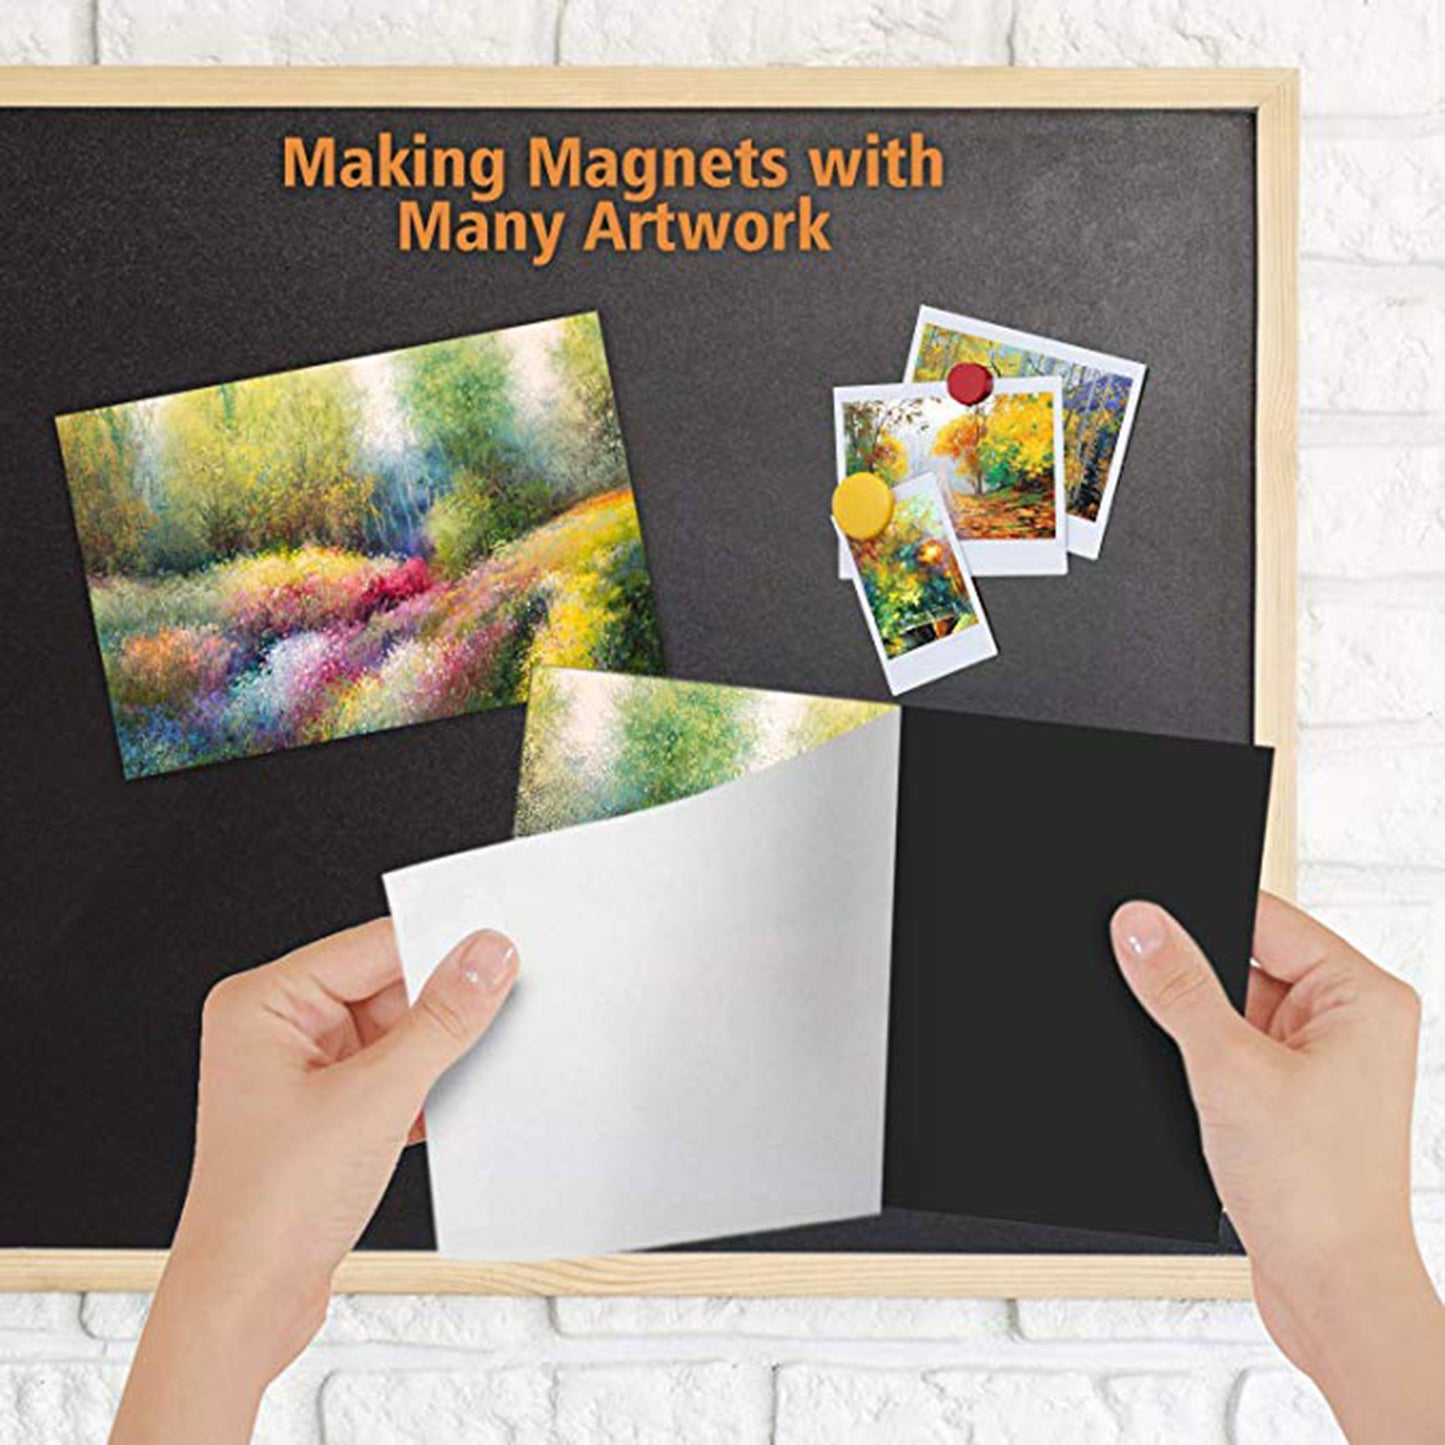 Magnetic Sheets with Adhesive Backing 8 x 10 5 PCs